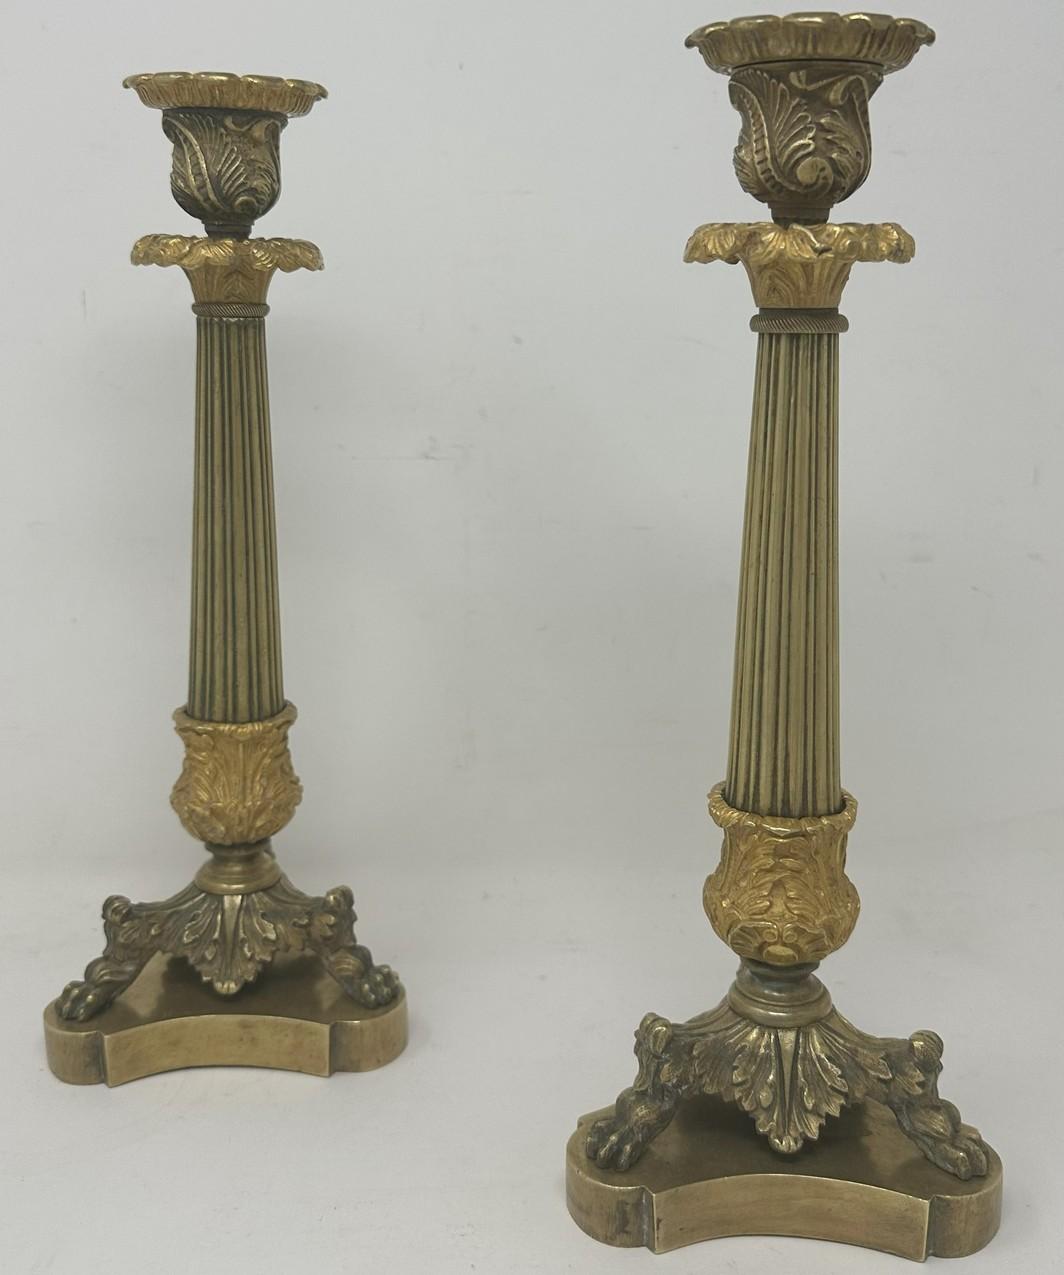 Stunning Pair French Heavy Gauge Ormolu Bronze Dore Single Light Mantle or Table Candlesticks of chisel cast quality and of generous tall proportions. 

Each having a Campana-form leaf cast candle socket with original firm fitting removable foliate